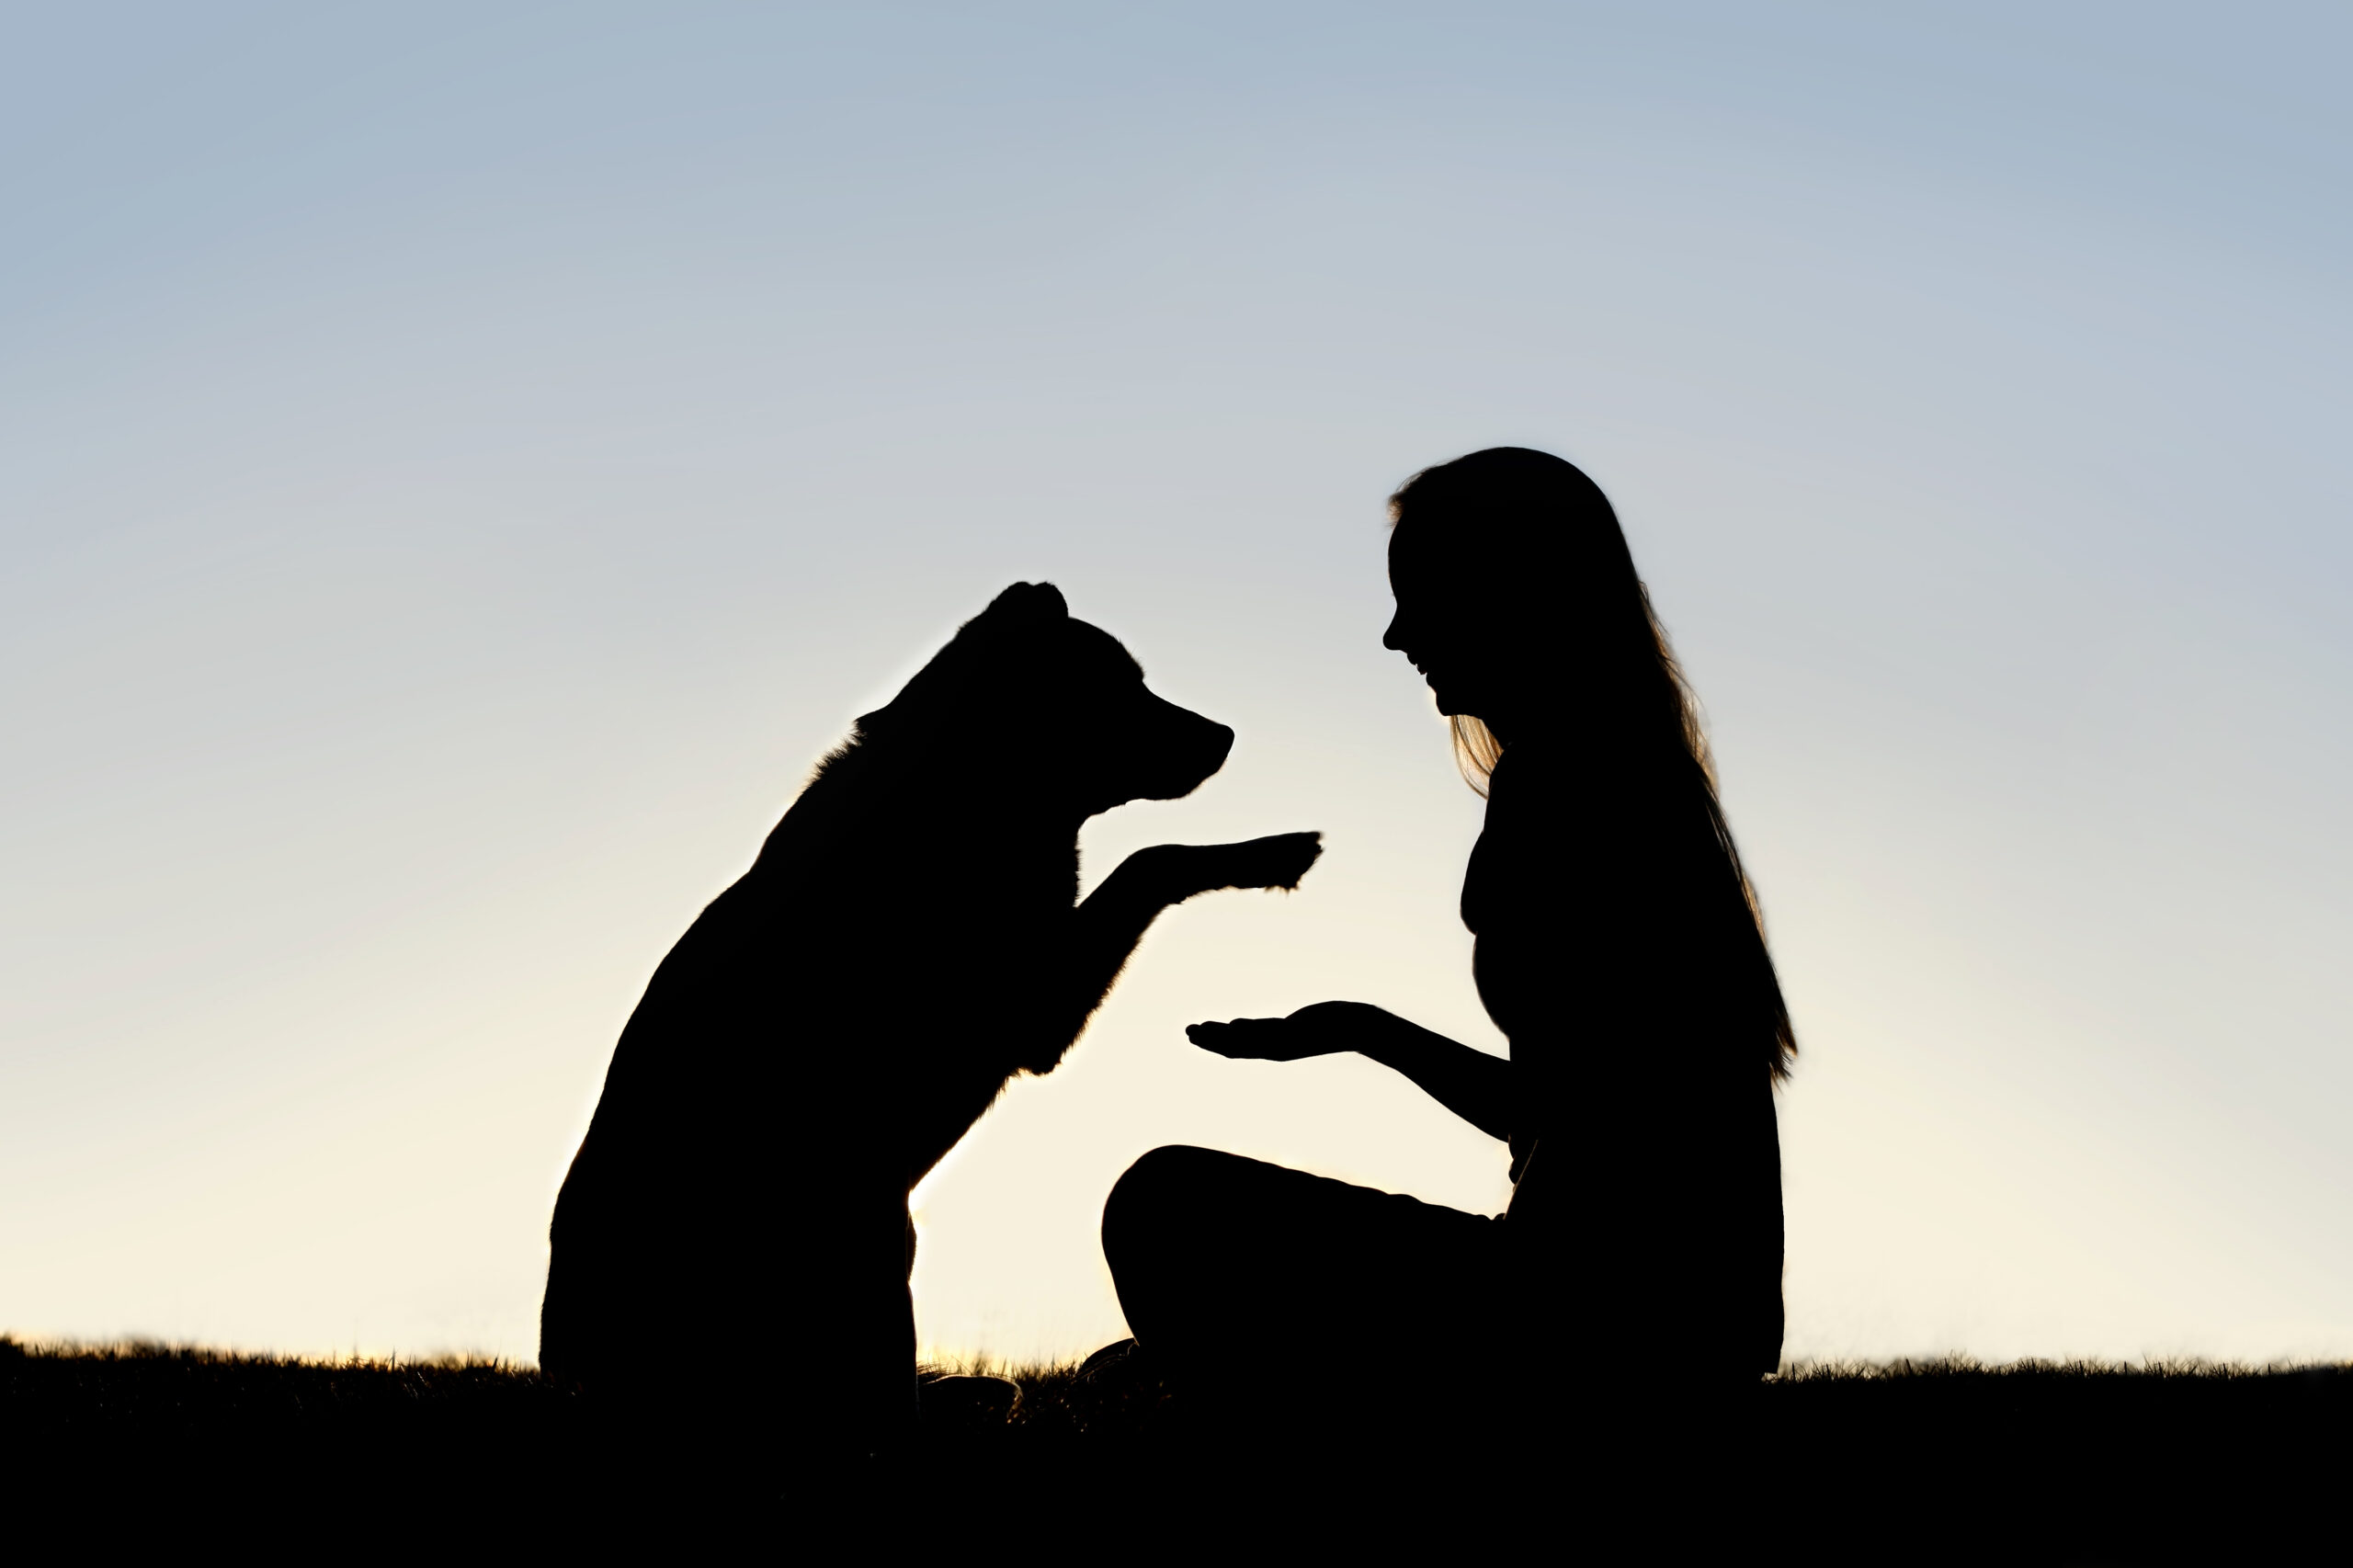 a happy girl is sitting outside in the grass, shaking hands with her German Shepherd dog, silhouetted against the sunsetting sky